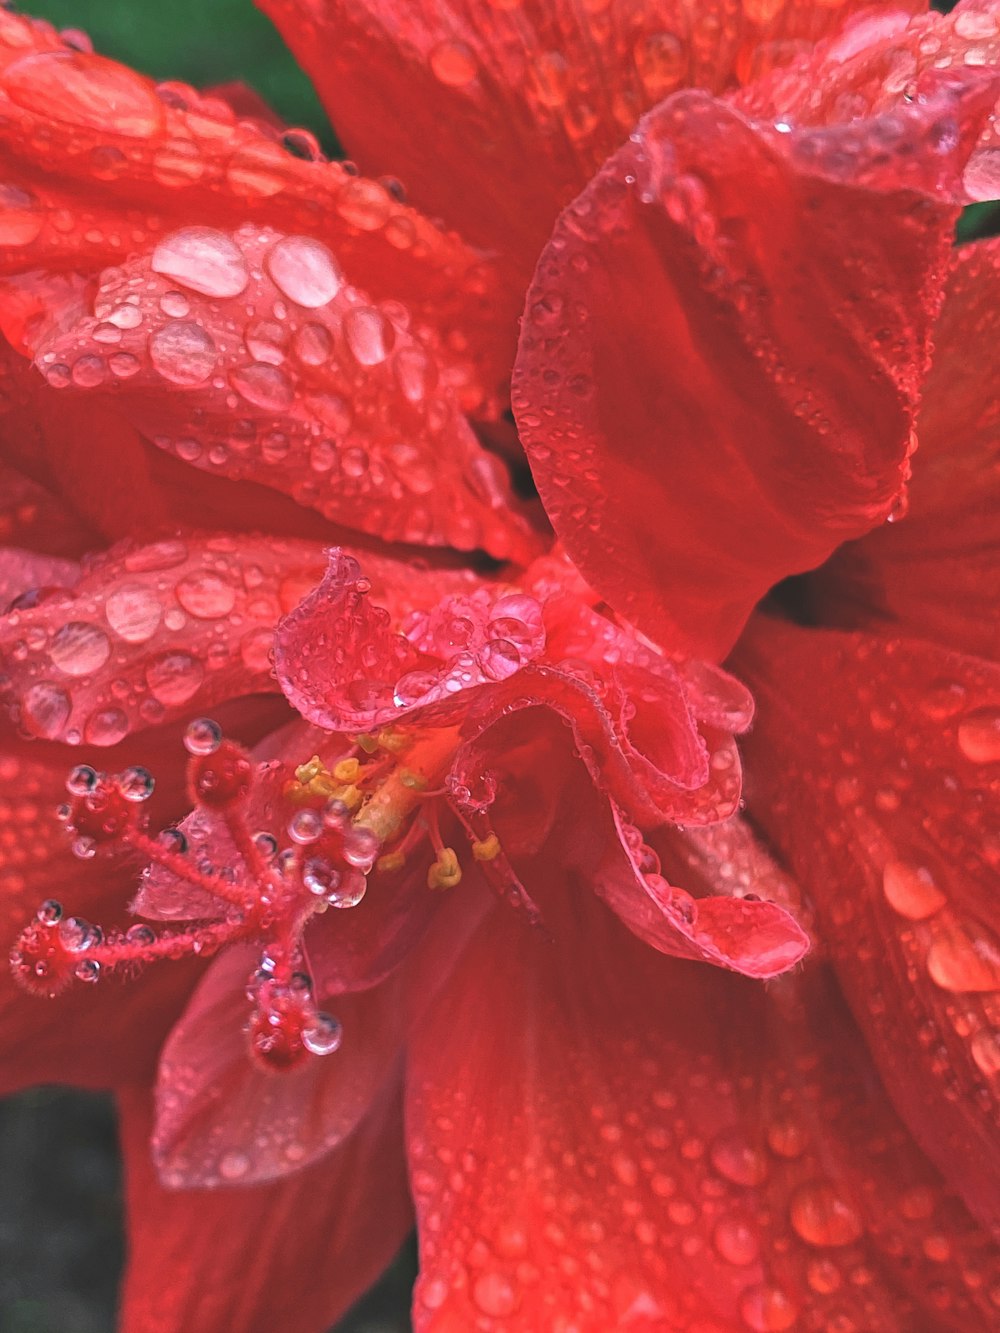 red hibiscus in bloom with dew drops